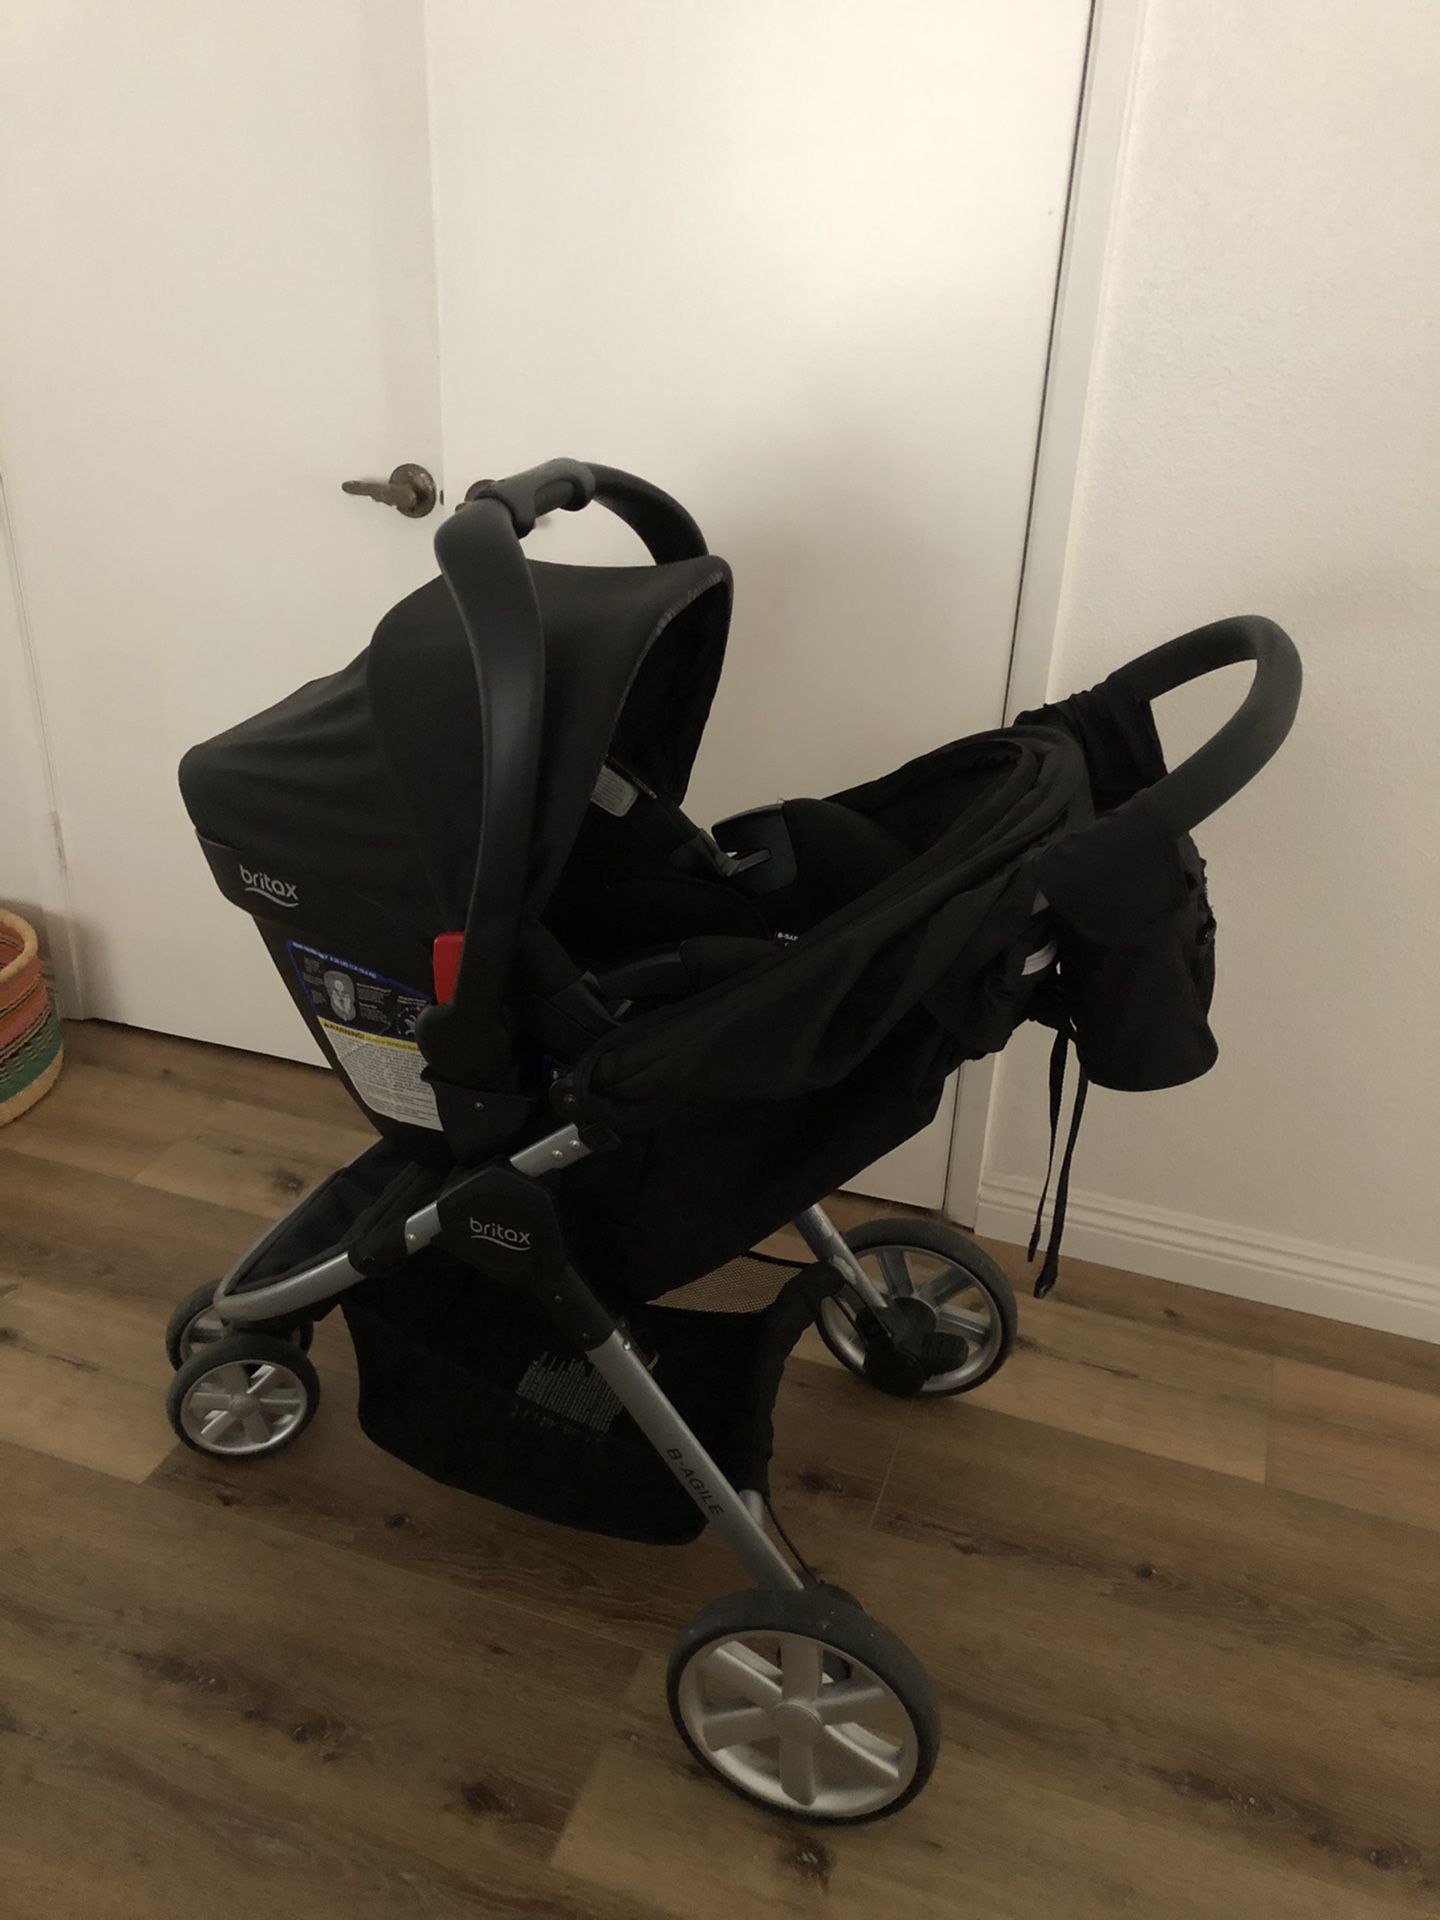 Britax be agile stroller, infant car seat and bases